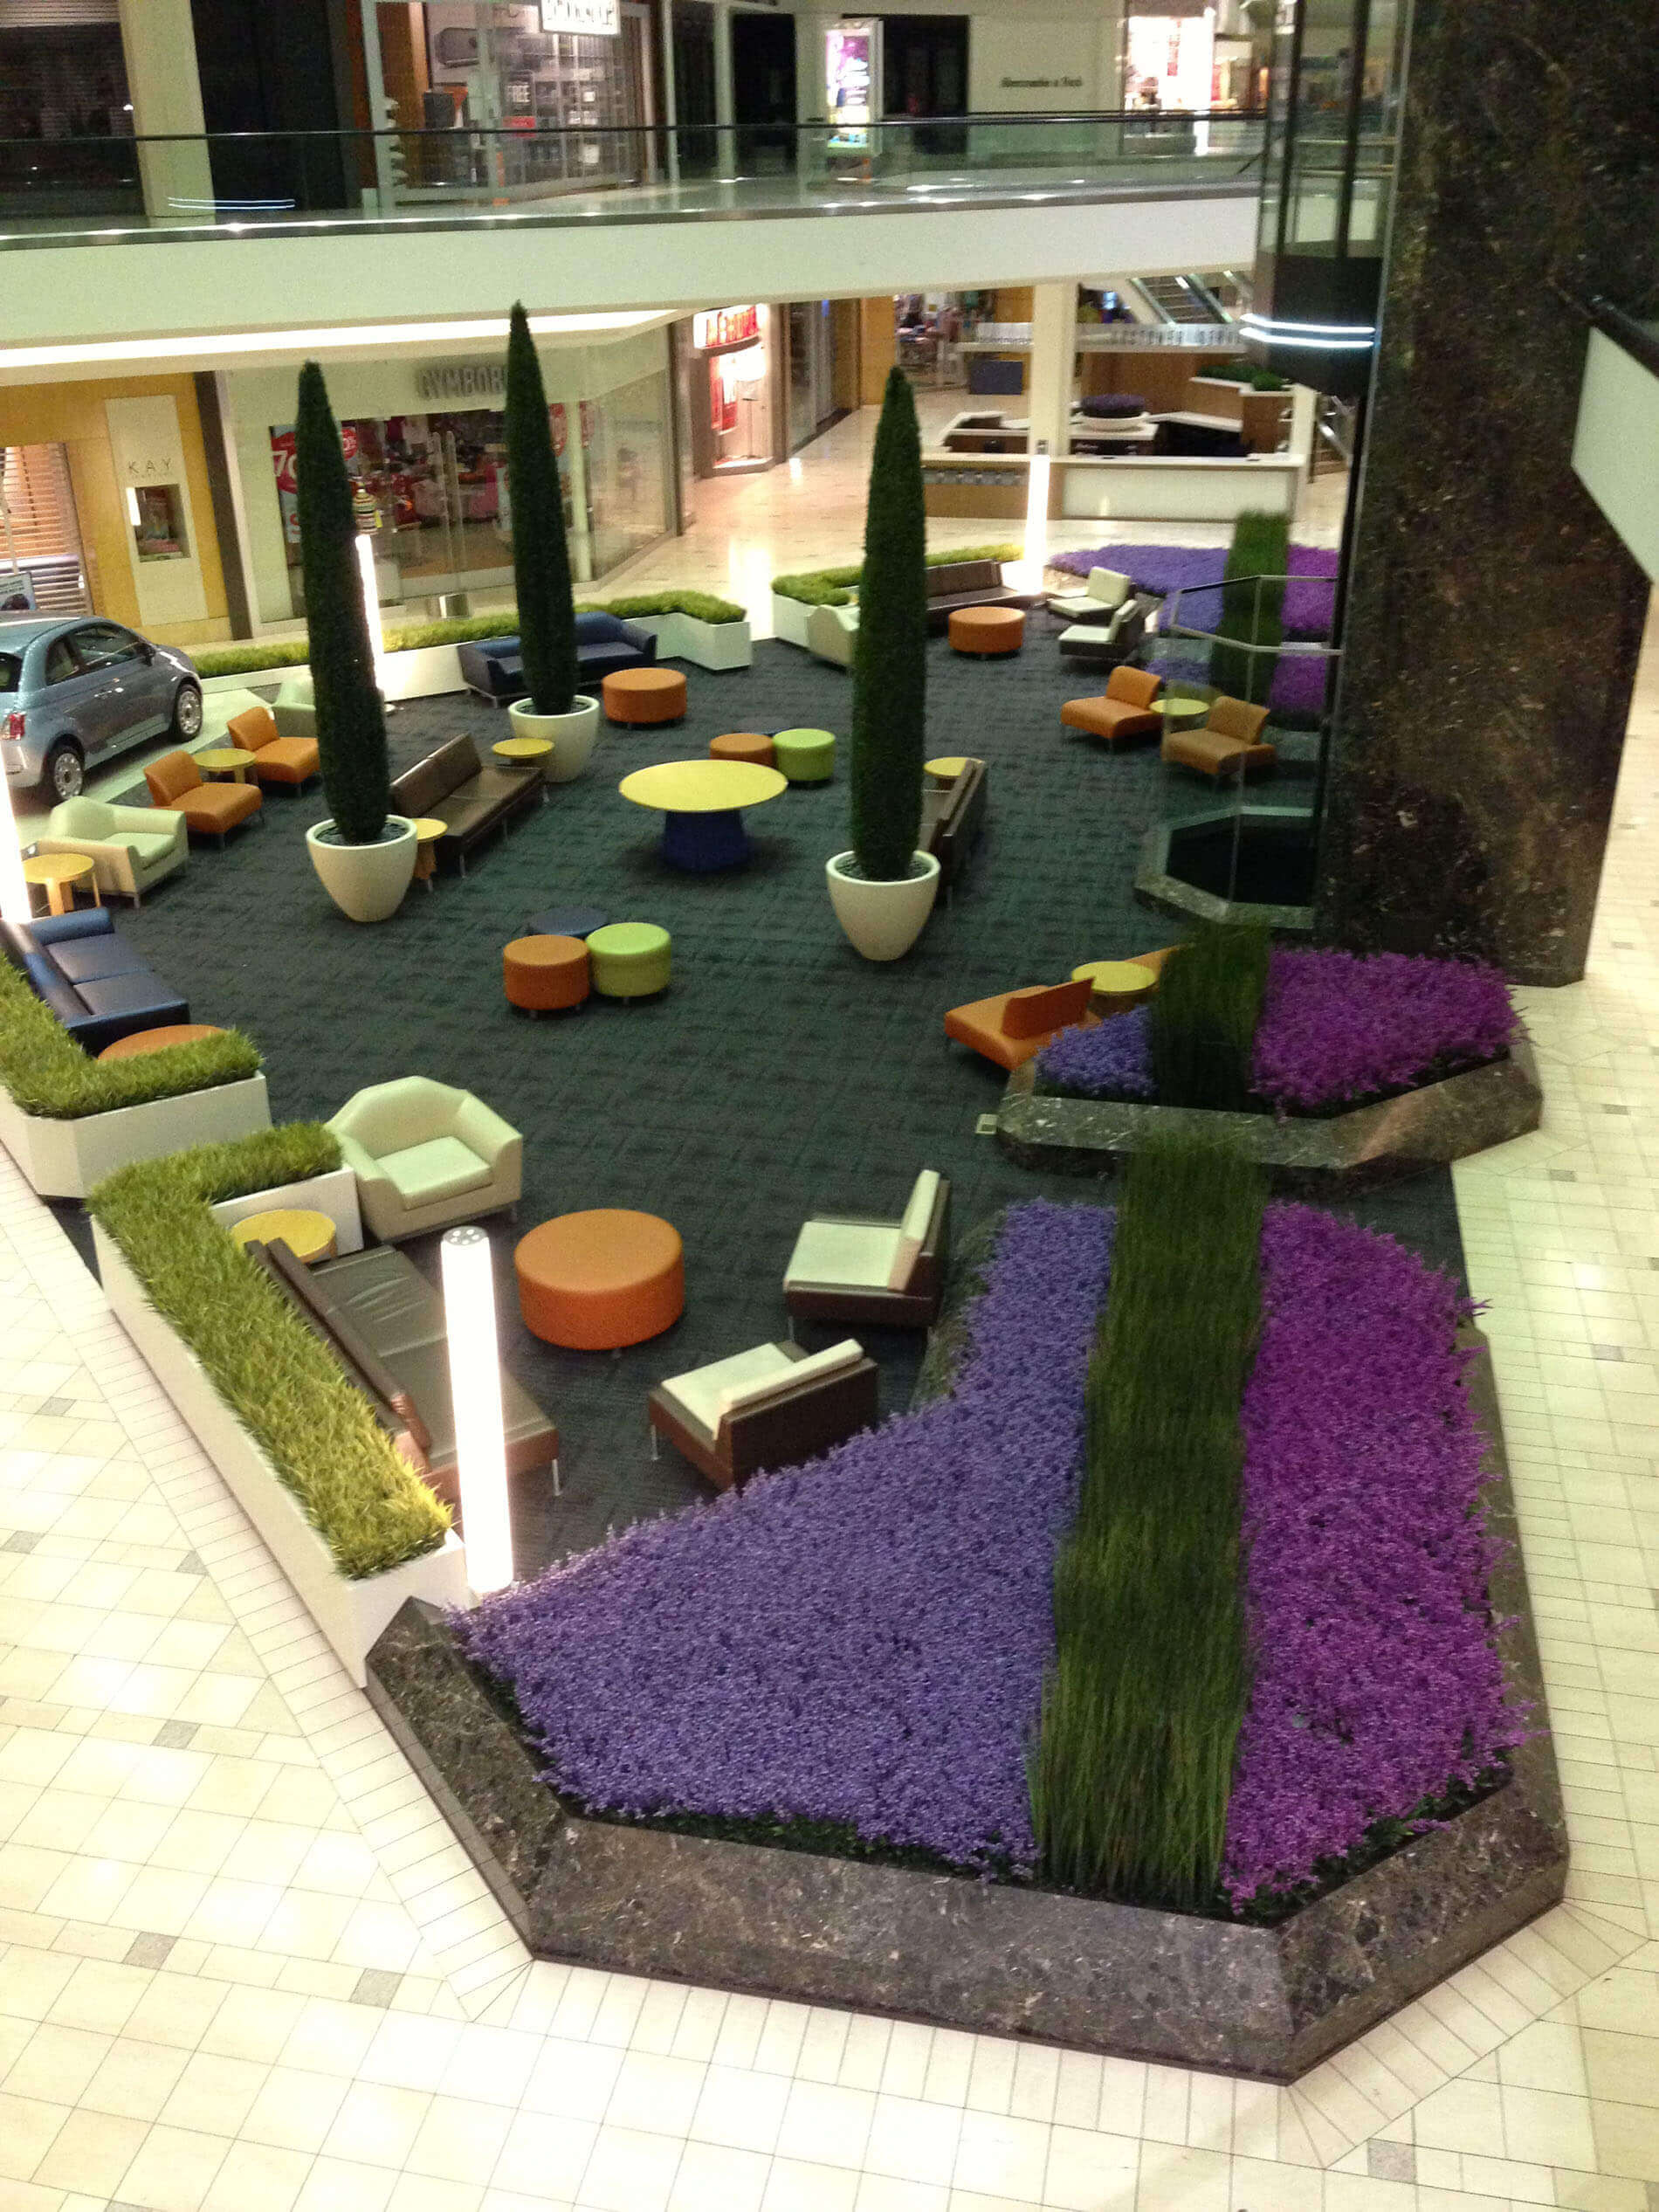 Plantscapes at sunvalley shopping center